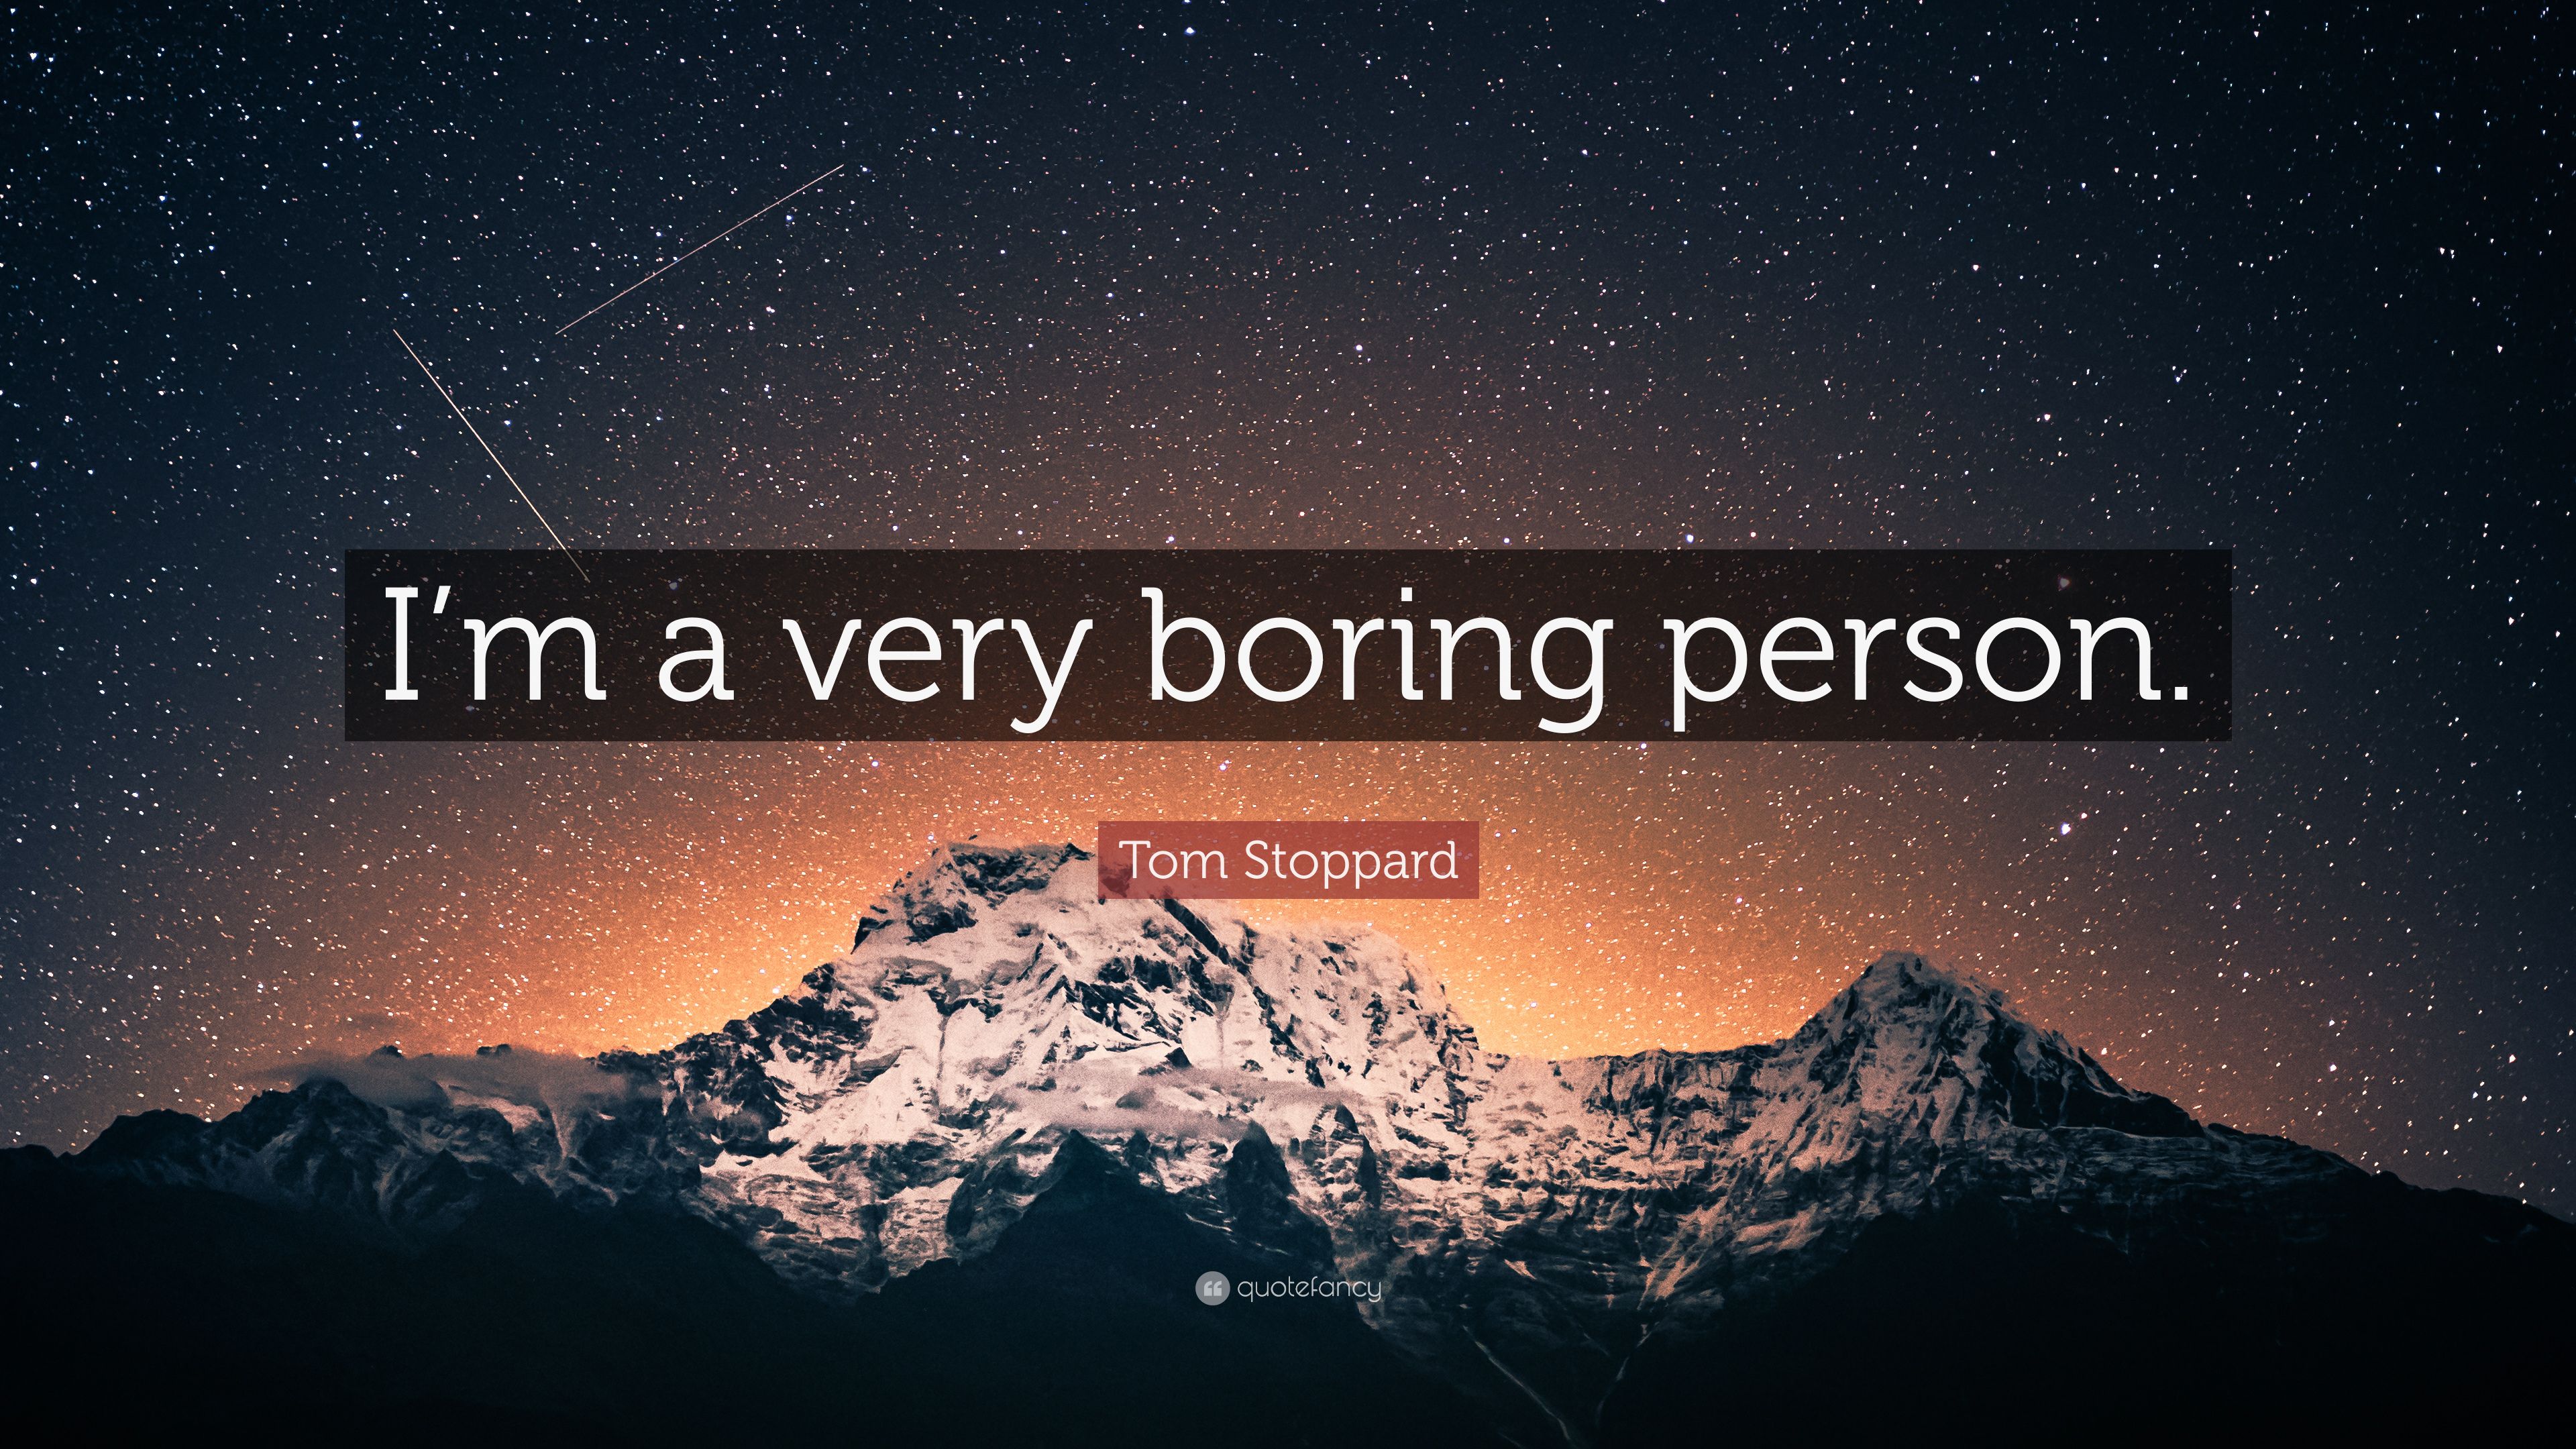 Tom Stoppard Quote: “I'm a very boring person.” (9 wallpaper)